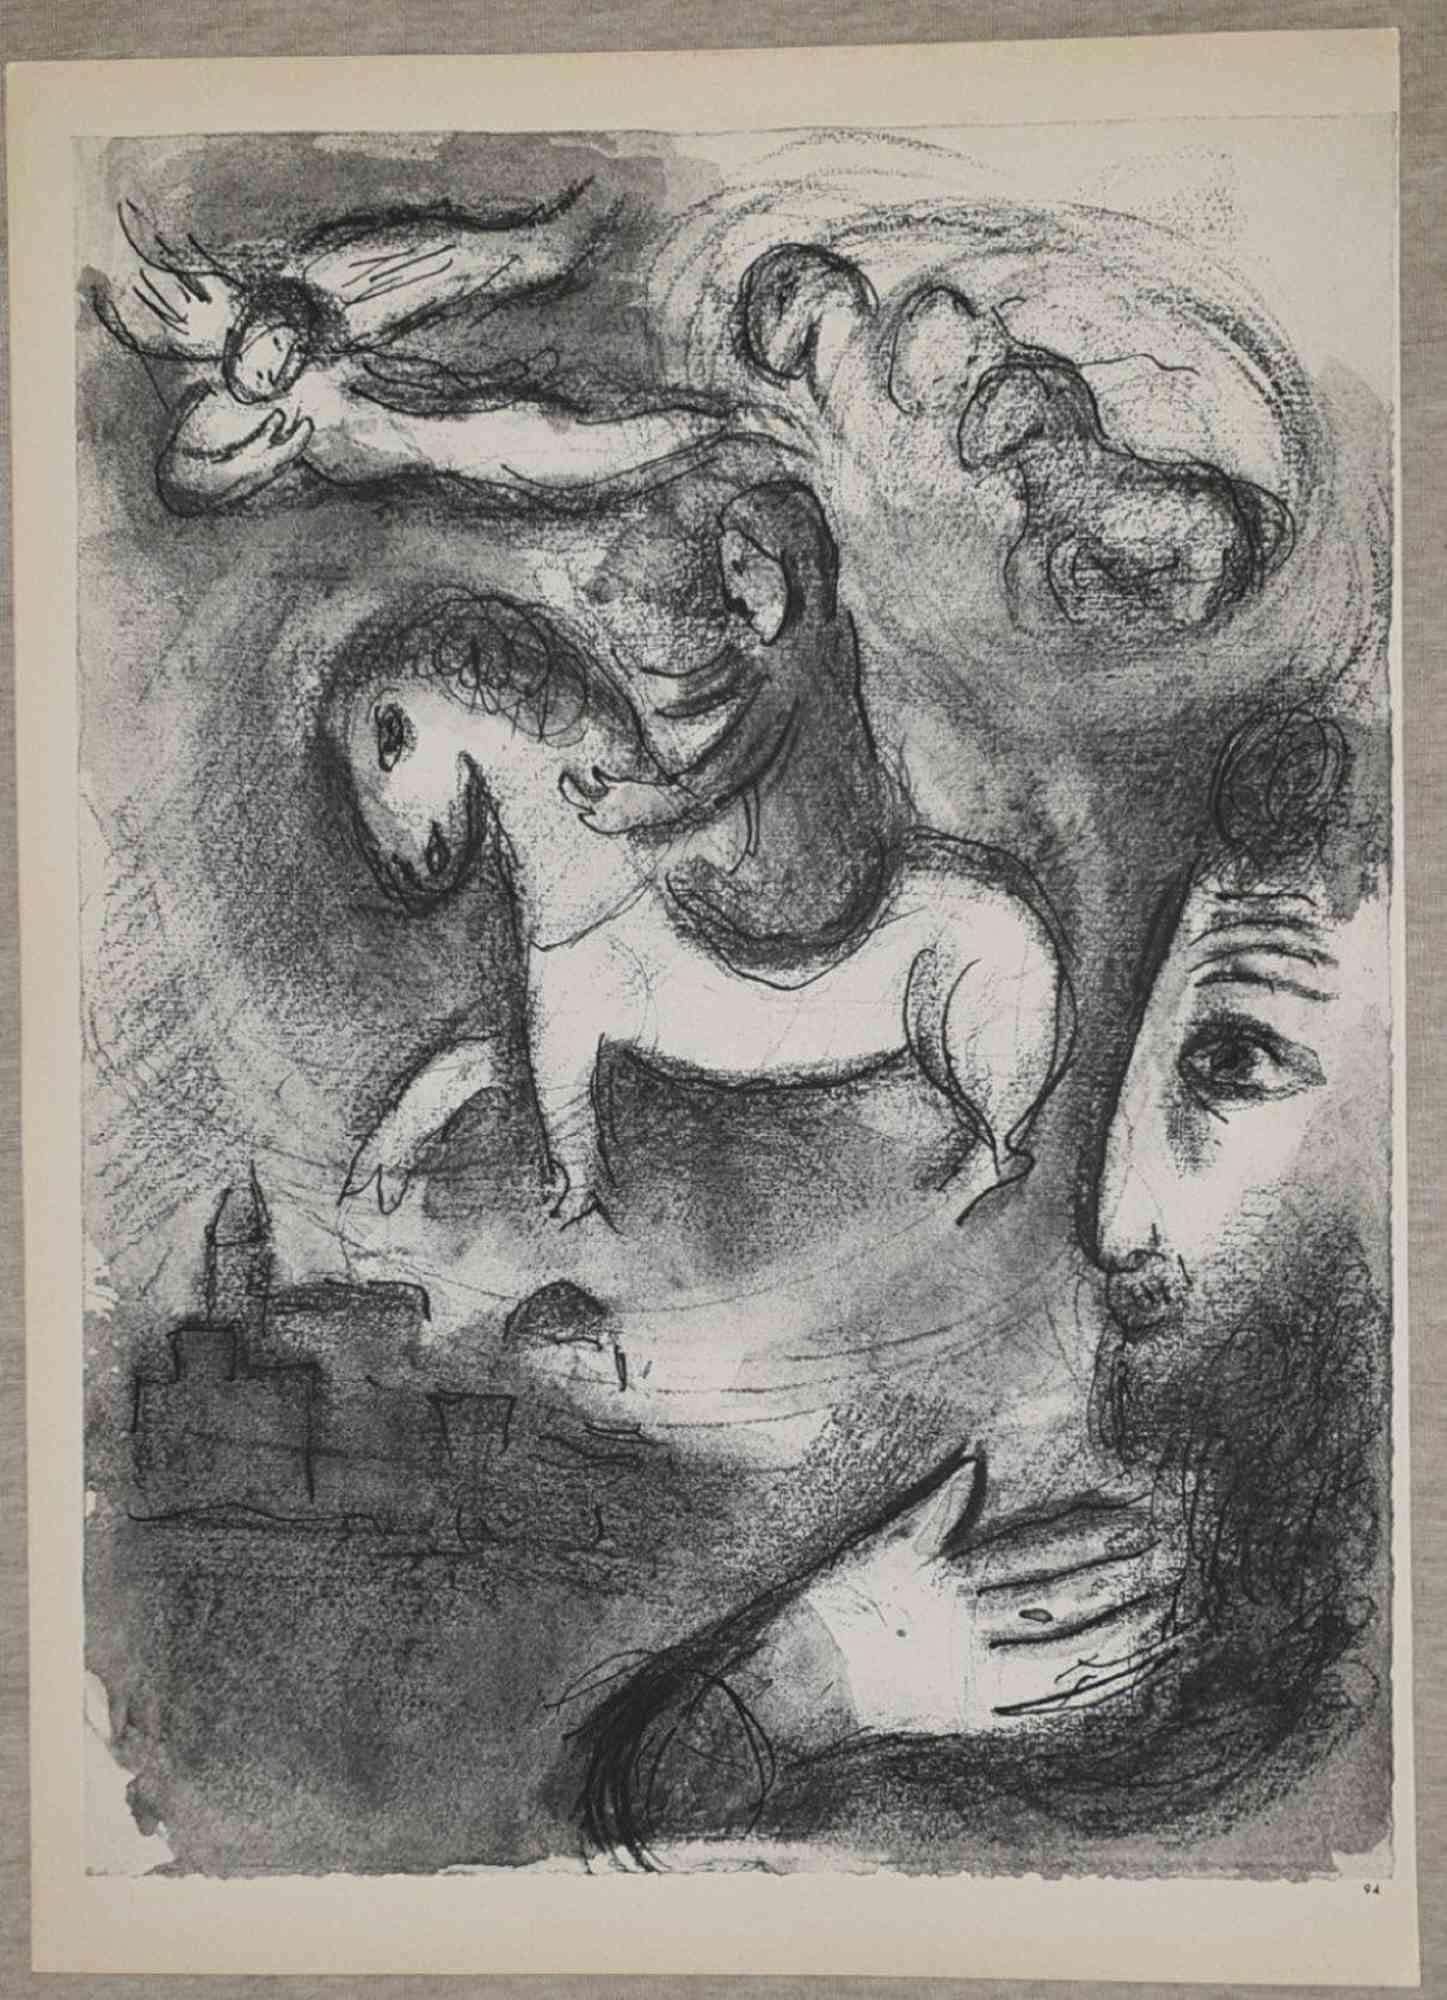 Vision Of Zachariah  is an artwork realized by March Chagall, 1960s.

Lithograph on brown-toned paper, no signature.

Lithograph on both sides.

Edition of 6500 unsigned lithographs. Printed by Mourlot and published by Tériade, Paris.

Ref. Mourlot,